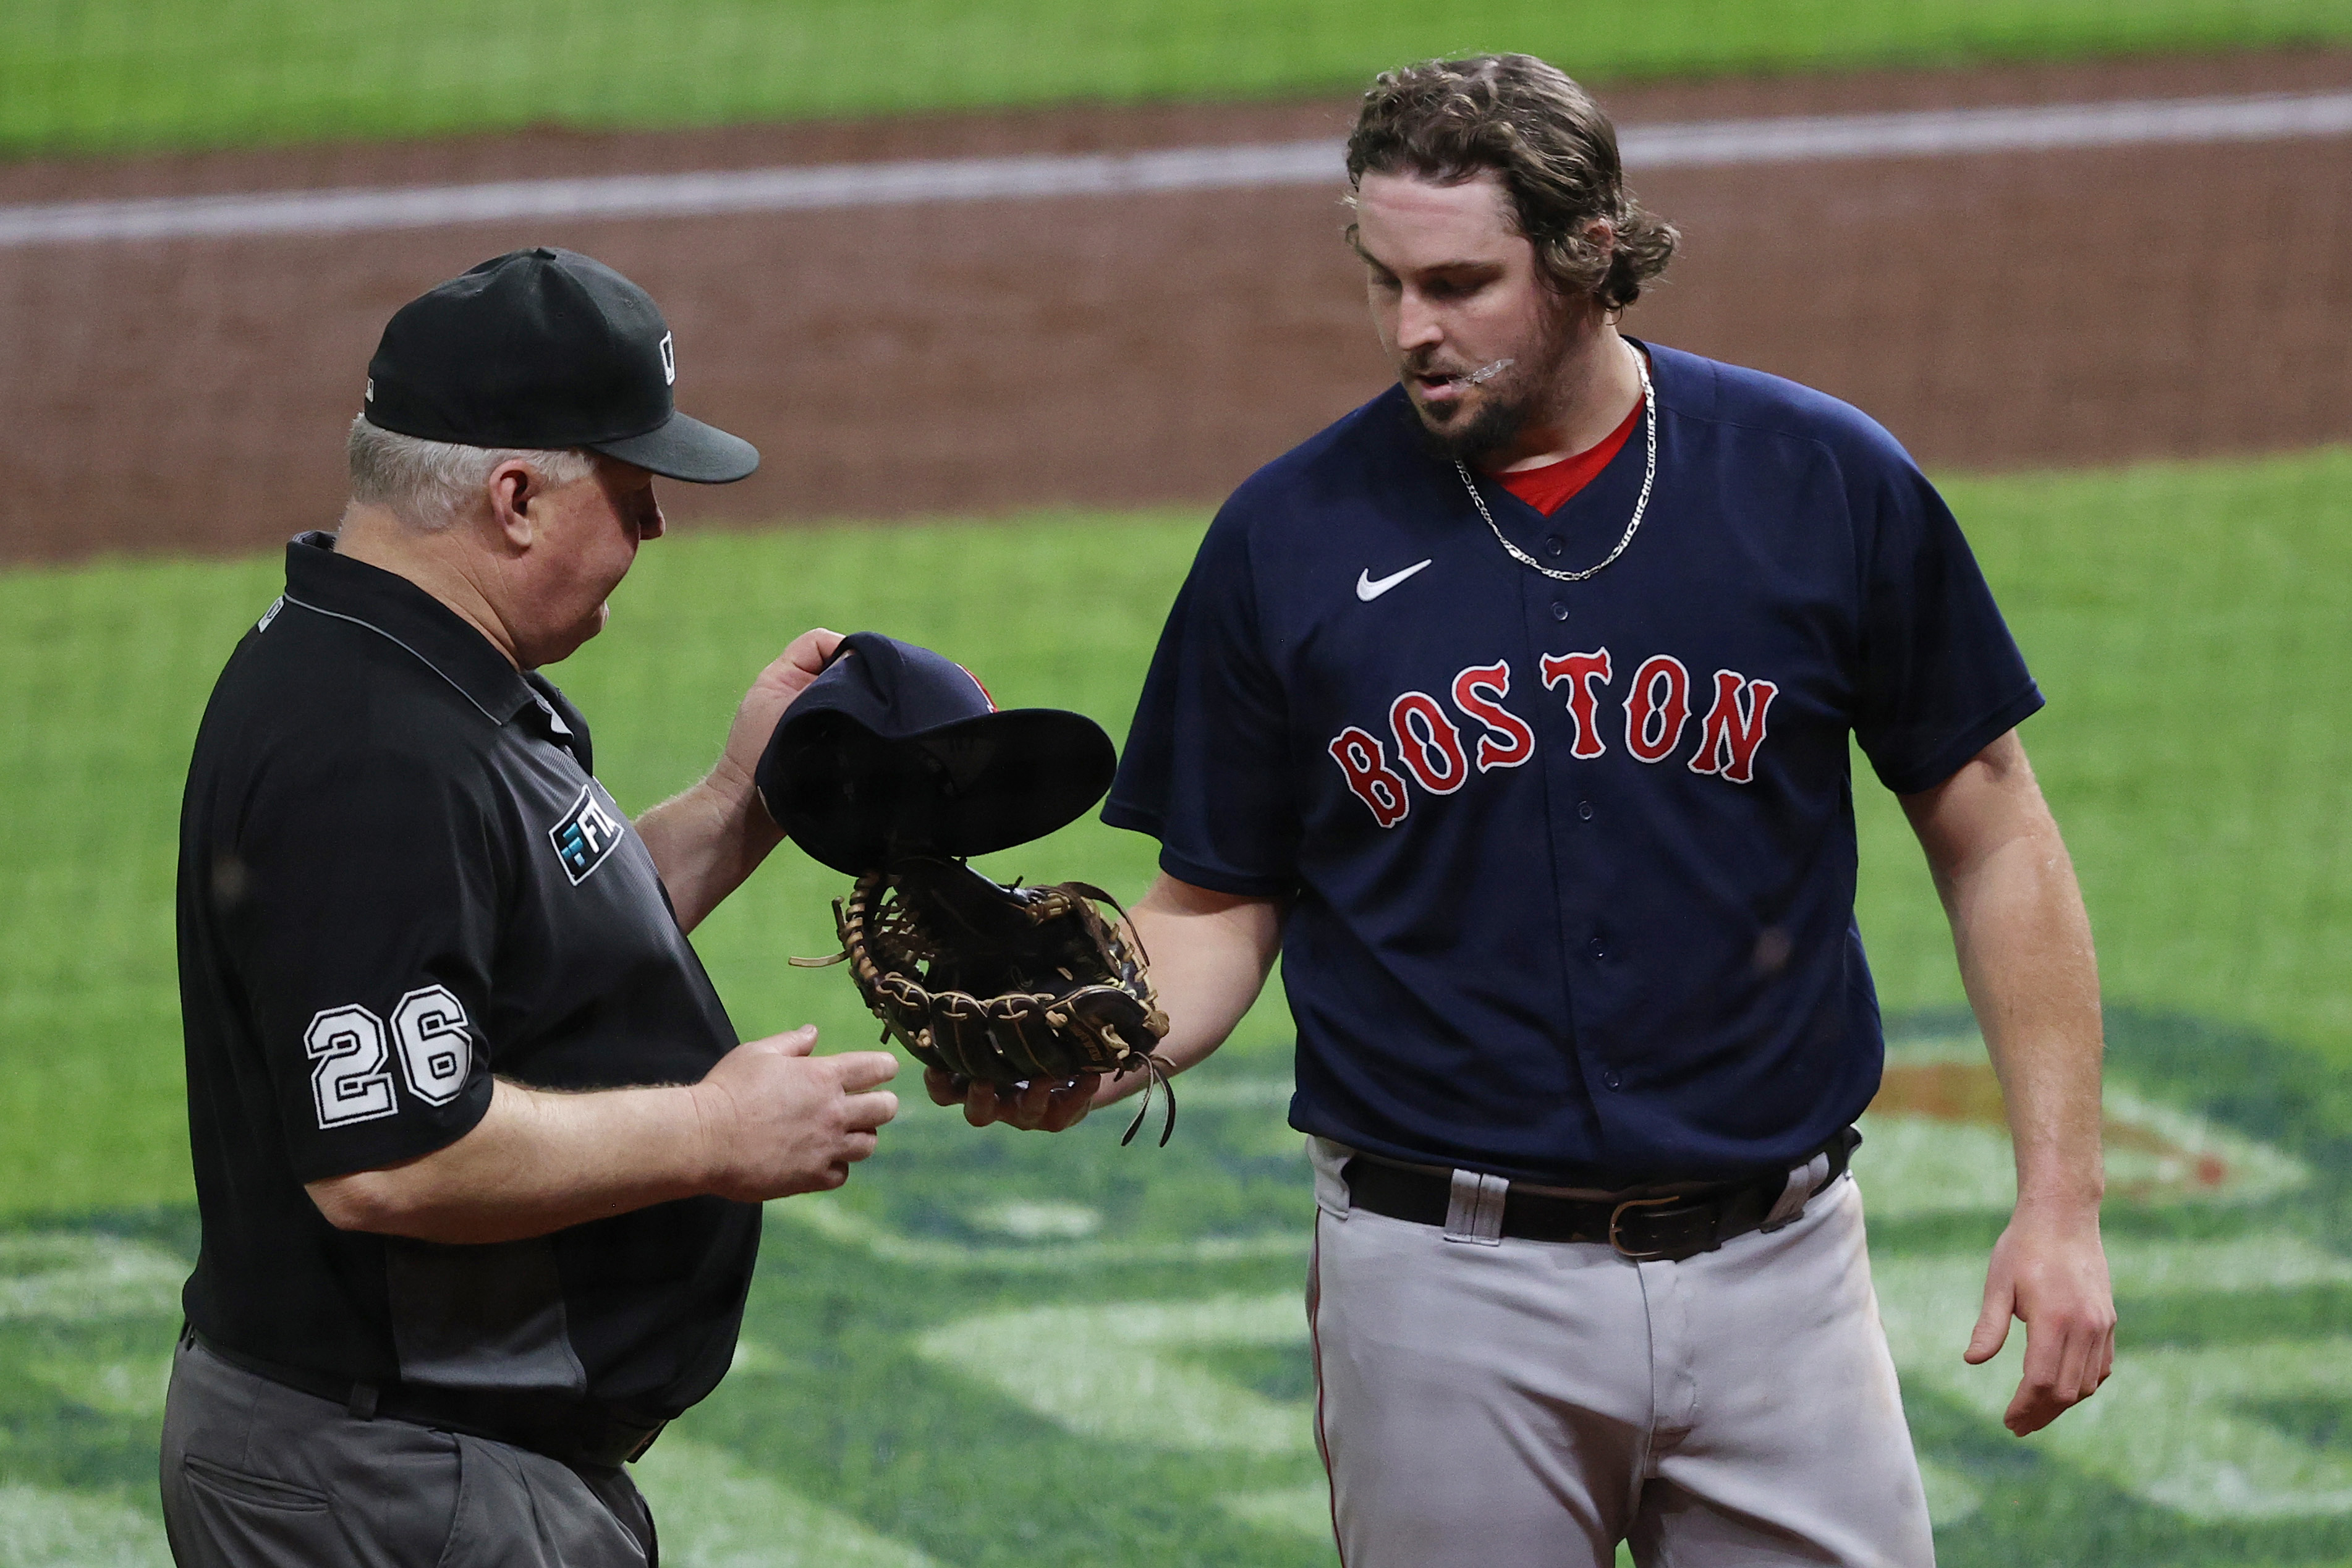 Former MLB pitcher perplexed by players using Spider Tack